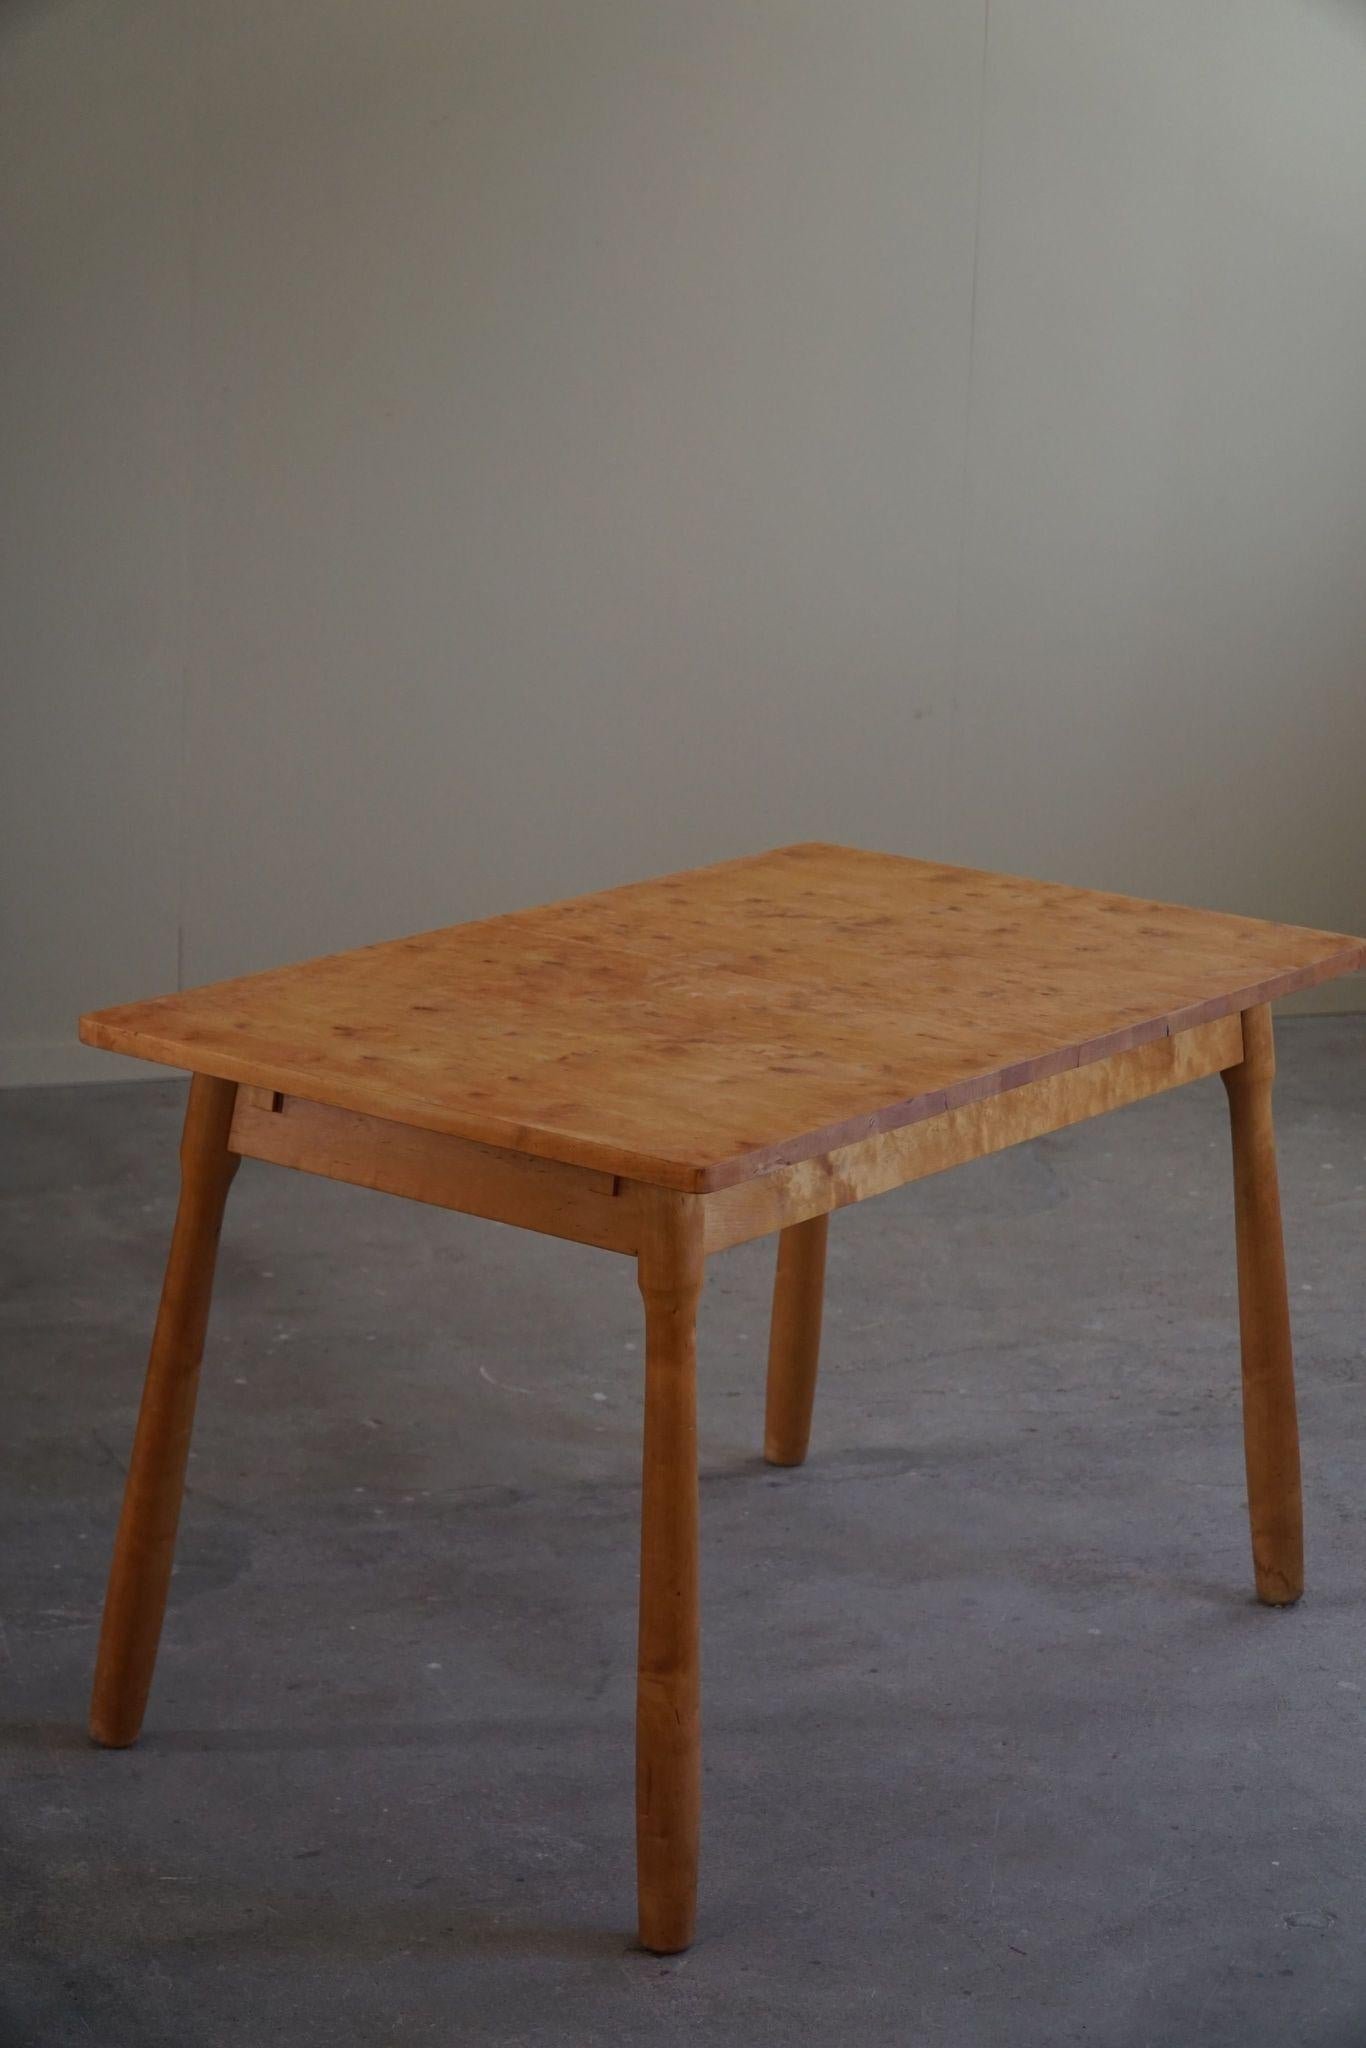 20th Century Danish Modern Desk / Dining Table in Birch Attributed to Philip Arctander, 1940s For Sale